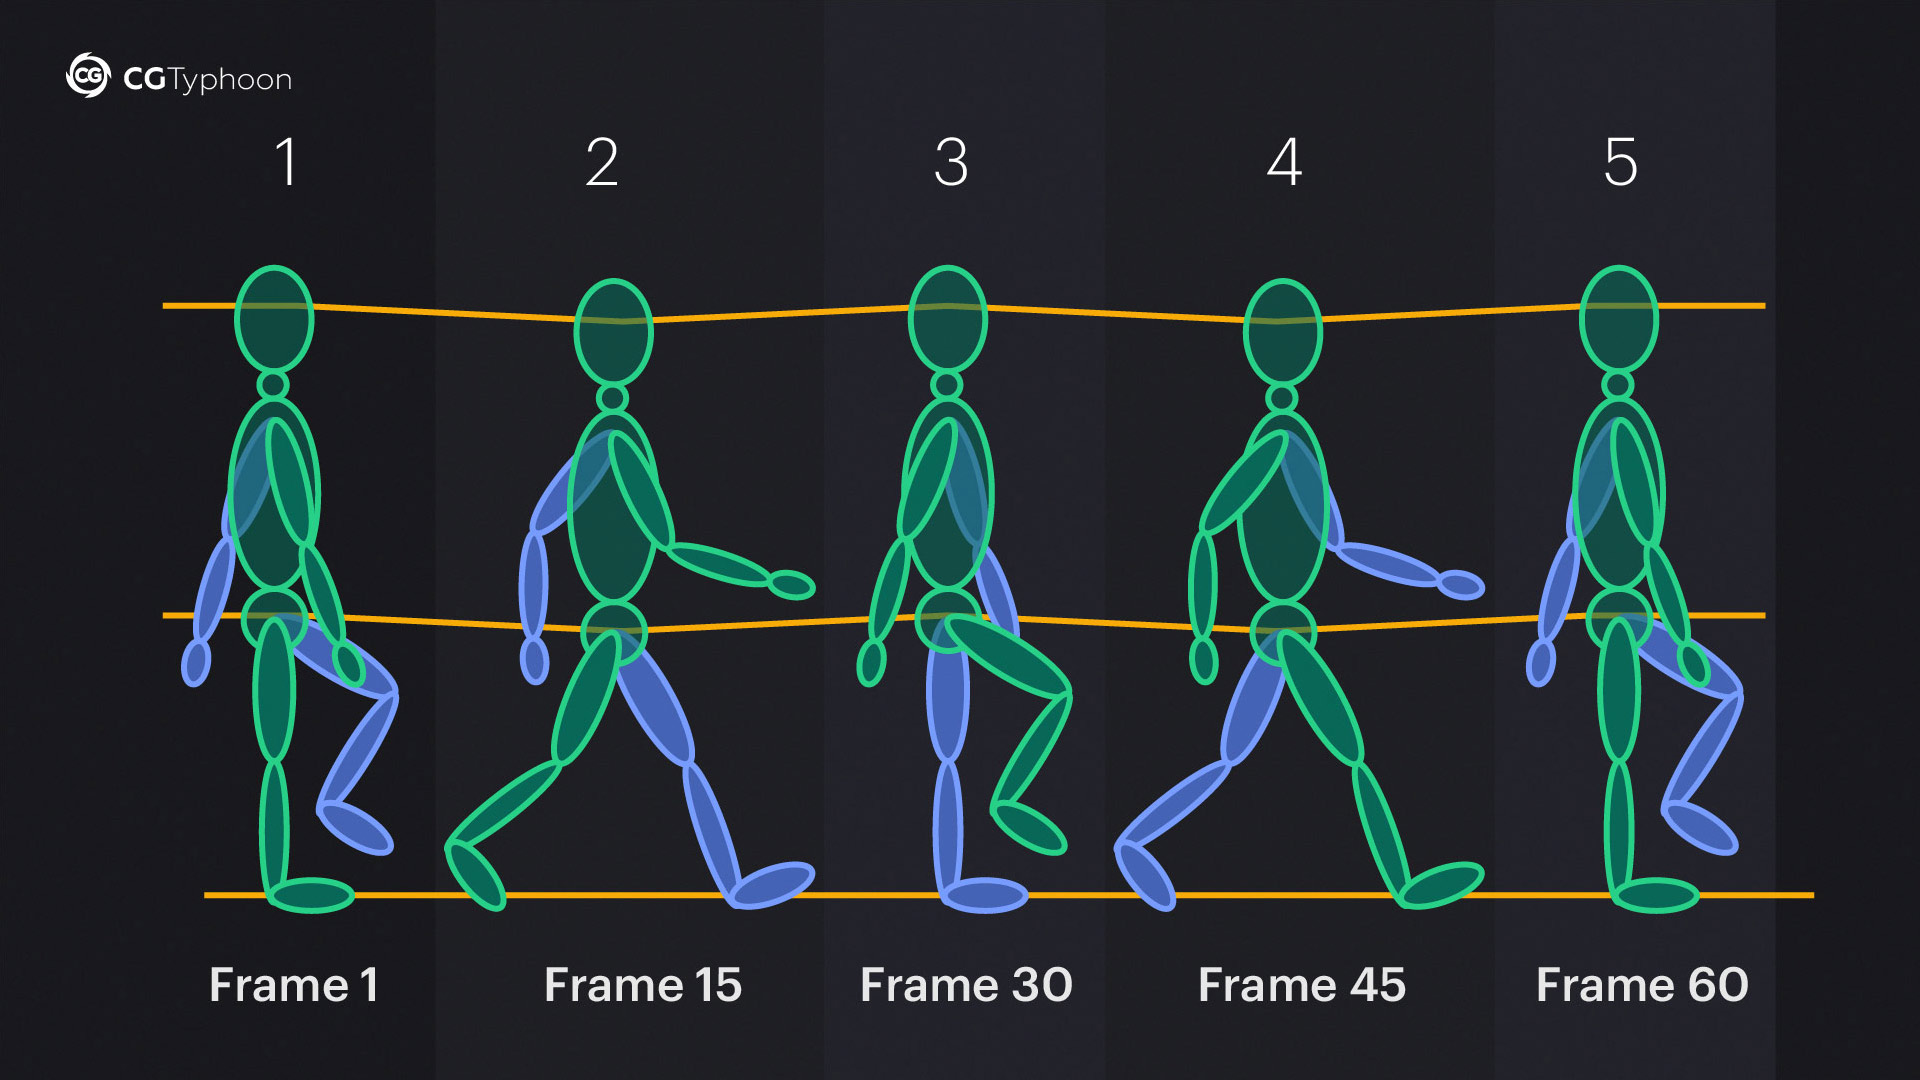 Human walking cycle. The key poses for 60 fps.